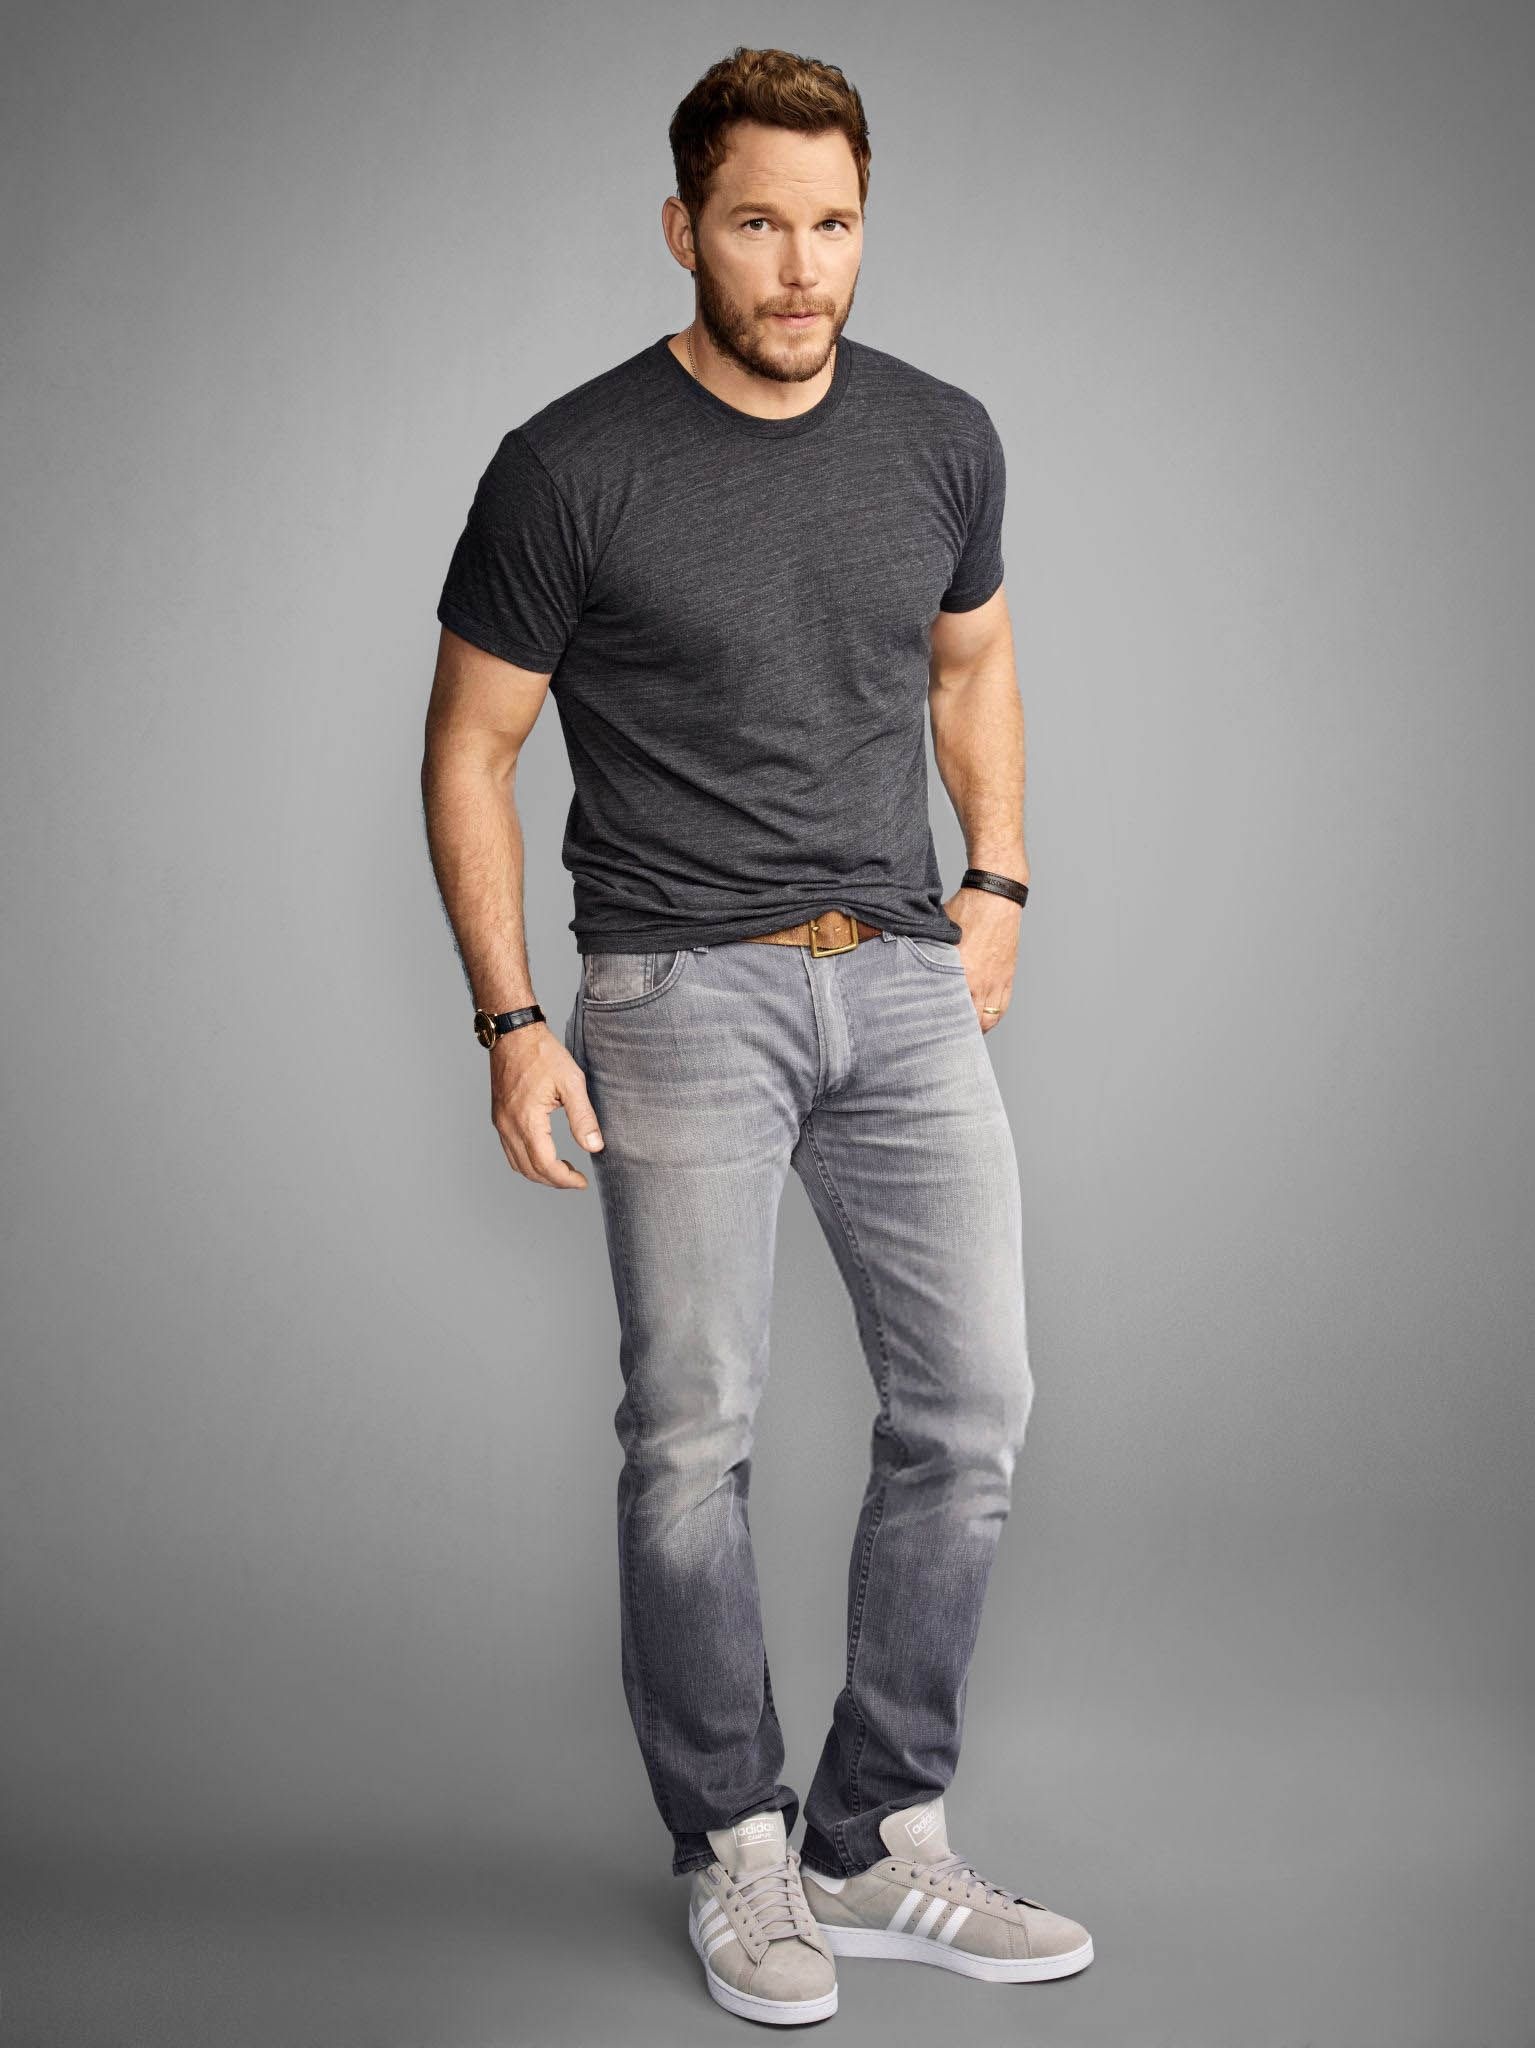 Chris Pratt: A lead voice role in the Disney/Pixar animated feature film Onward. 1540x2050 HD Background.